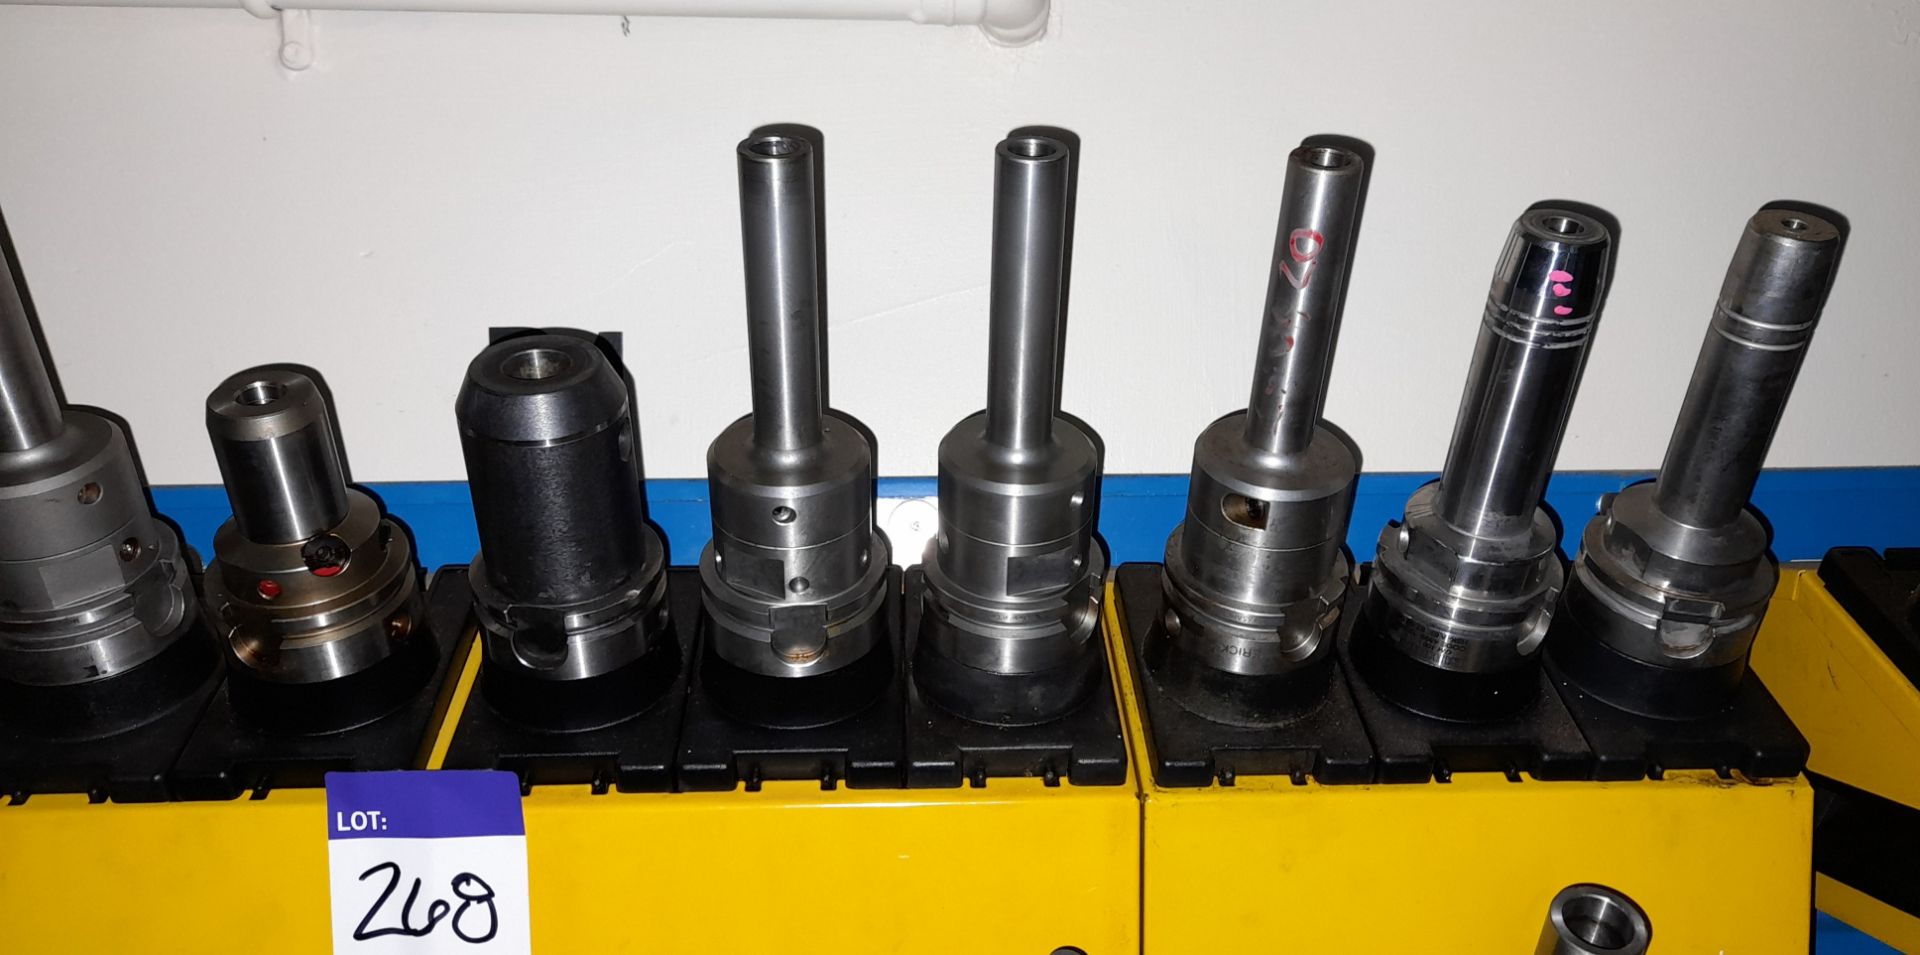 12 x Various HSK extension CNC tool holders, to yellow holder (rack not included) - Image 3 of 3